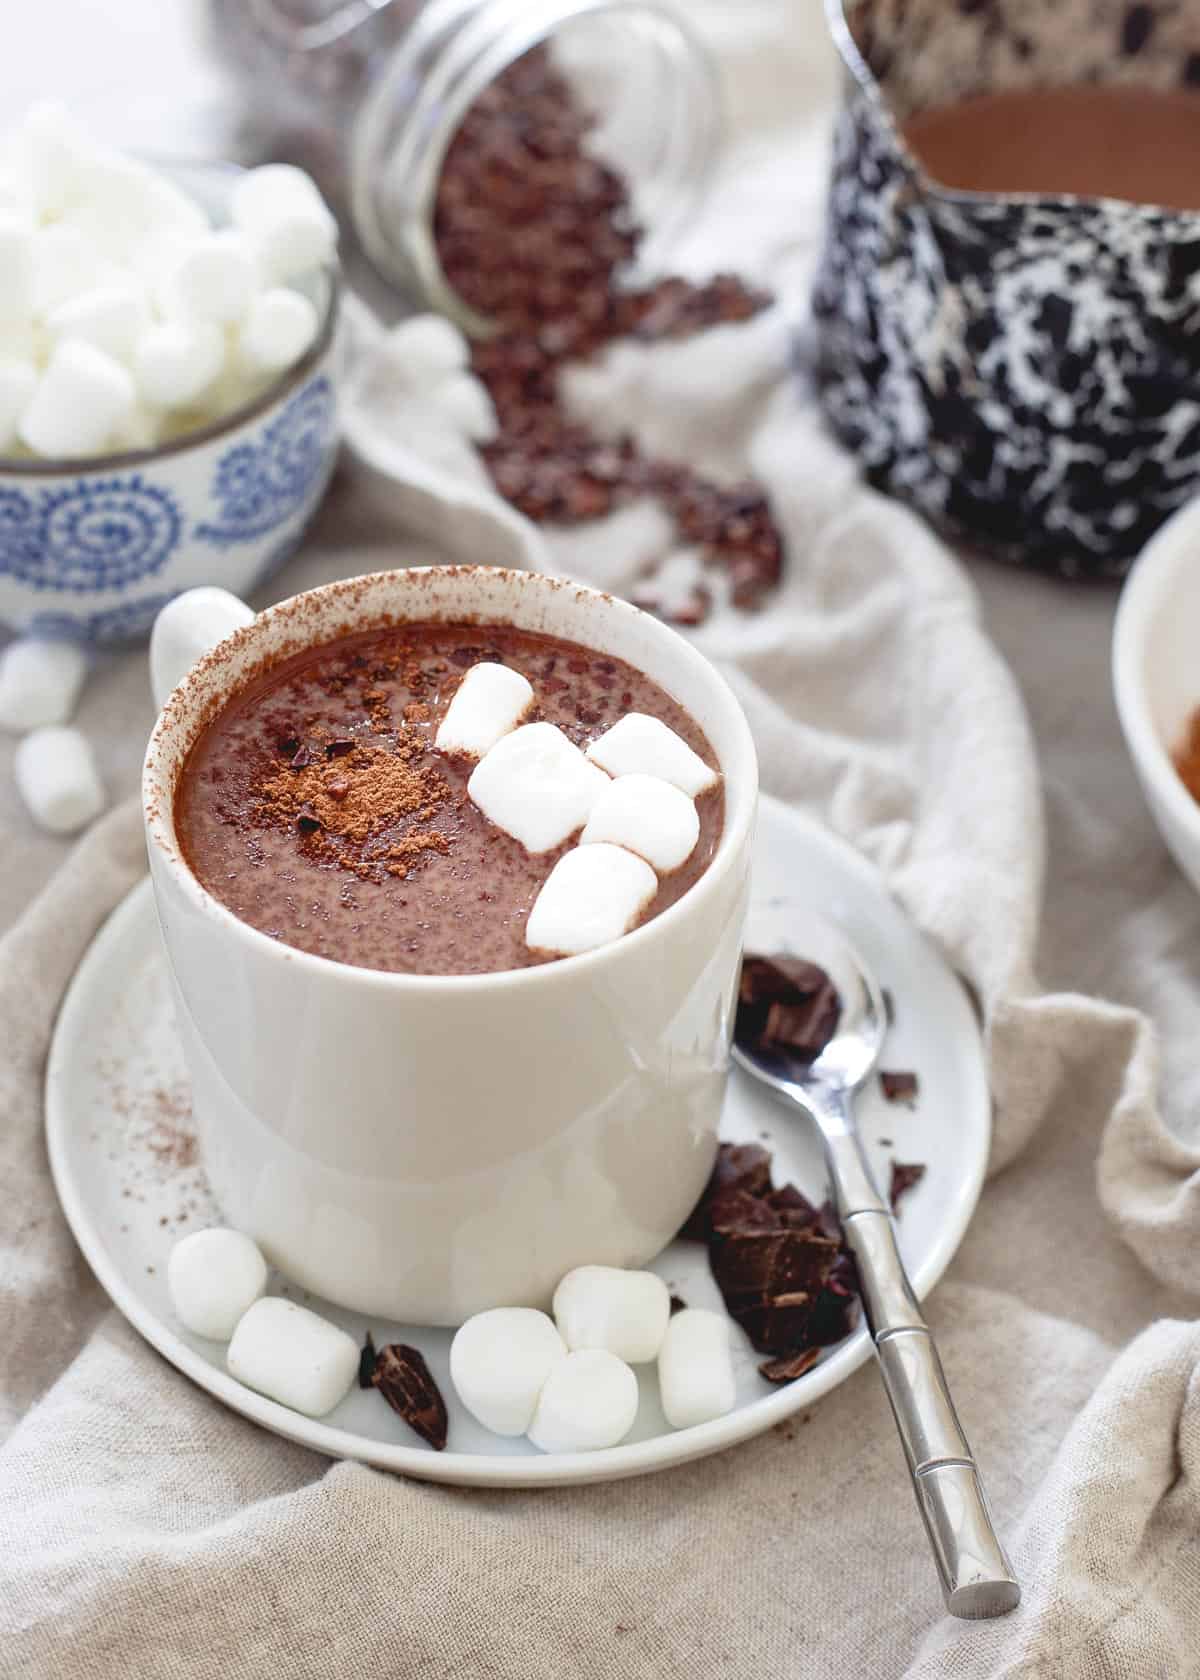 Tart cherries can help aid in muscle recovery and sleep. A mug of this creamy, decadent tart cherry hot chocolate is not only delicious but a nutritiously smart winter treat!